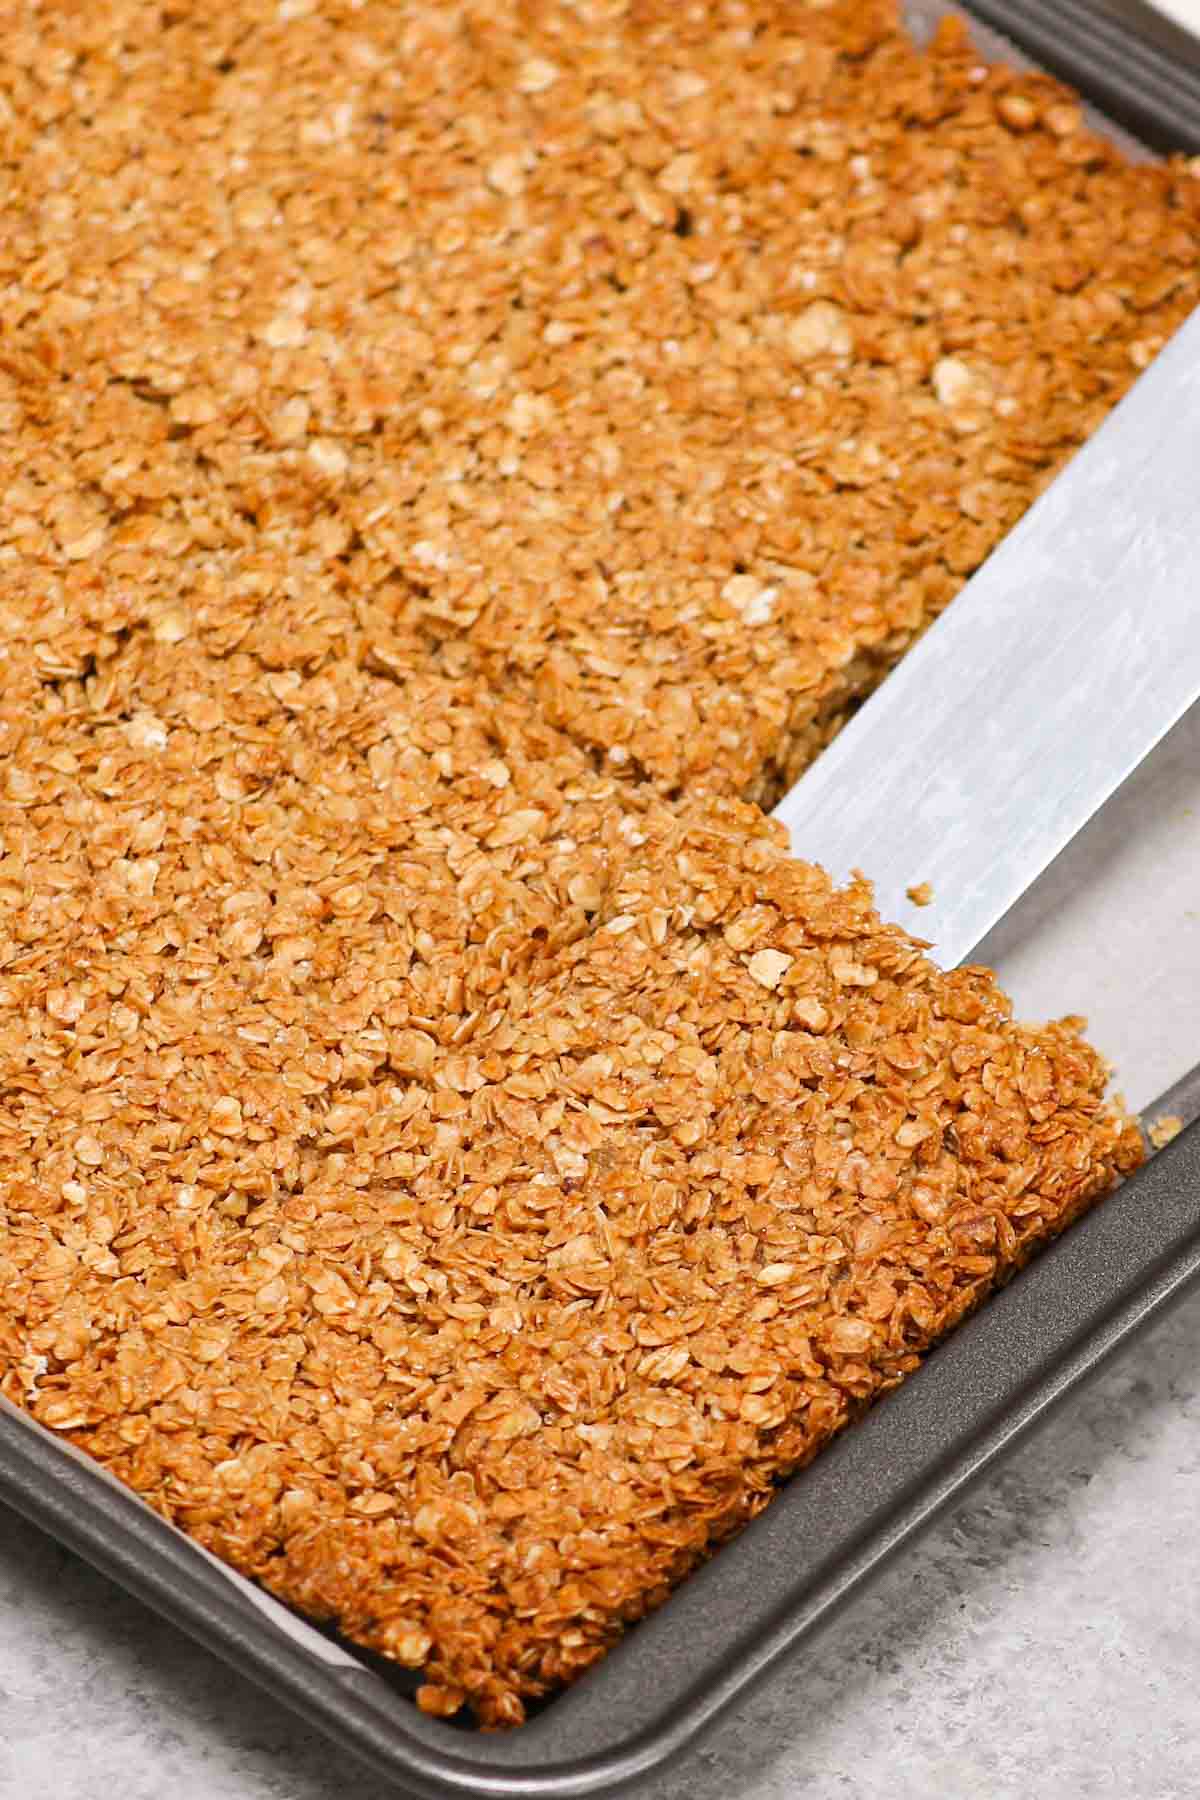 Lifting crispy dessert squares out of a baking sheet using a spatula